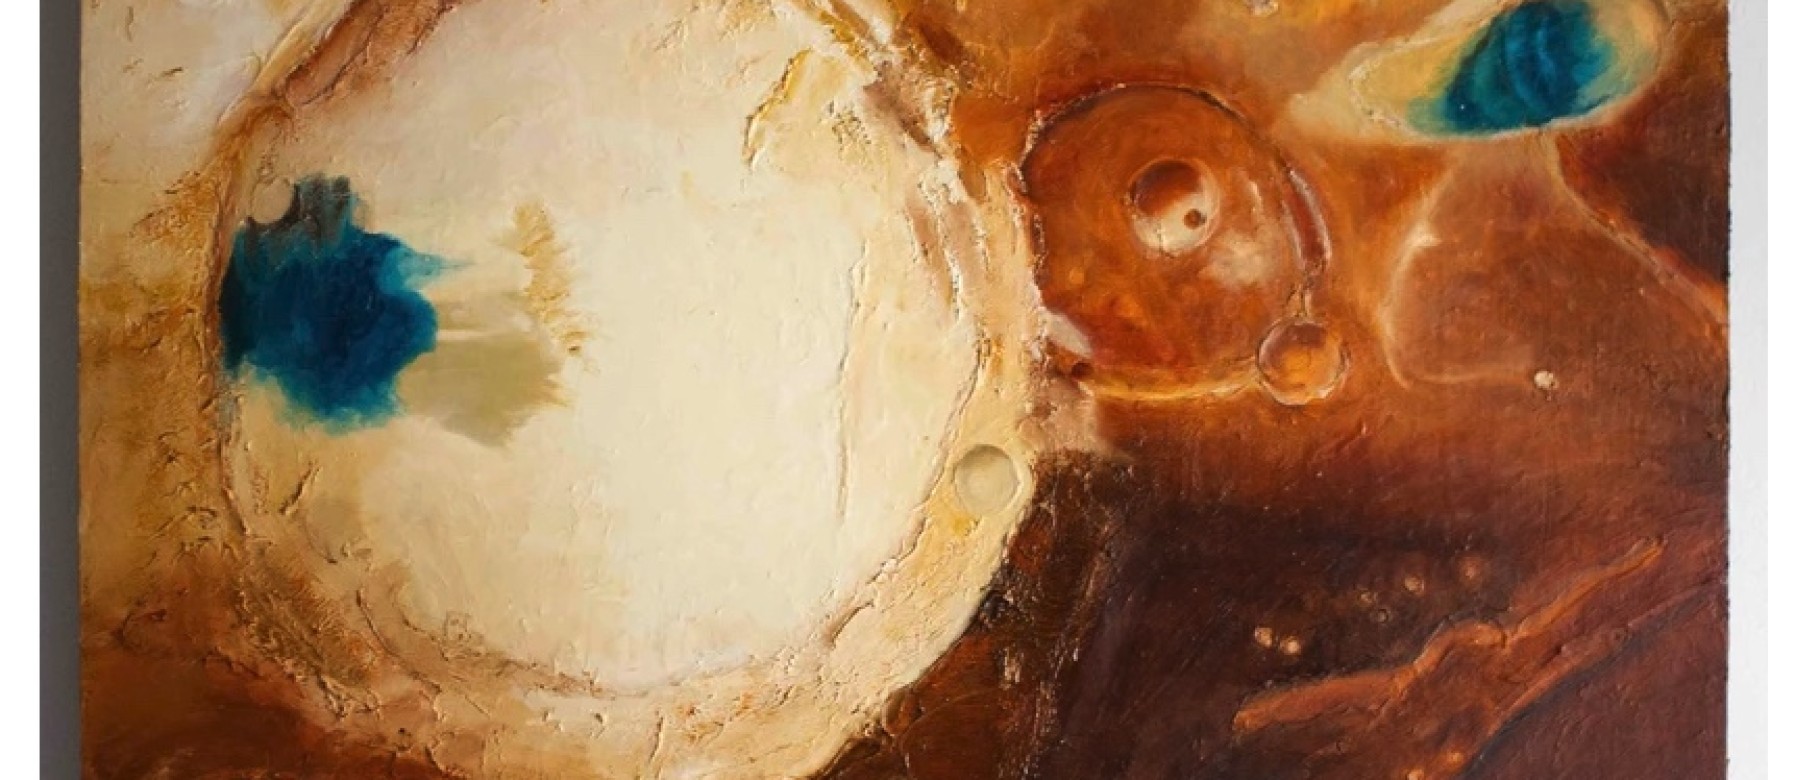 Image of a painting/sculpture hybrid by Frances Babb depicting the surface of Mars